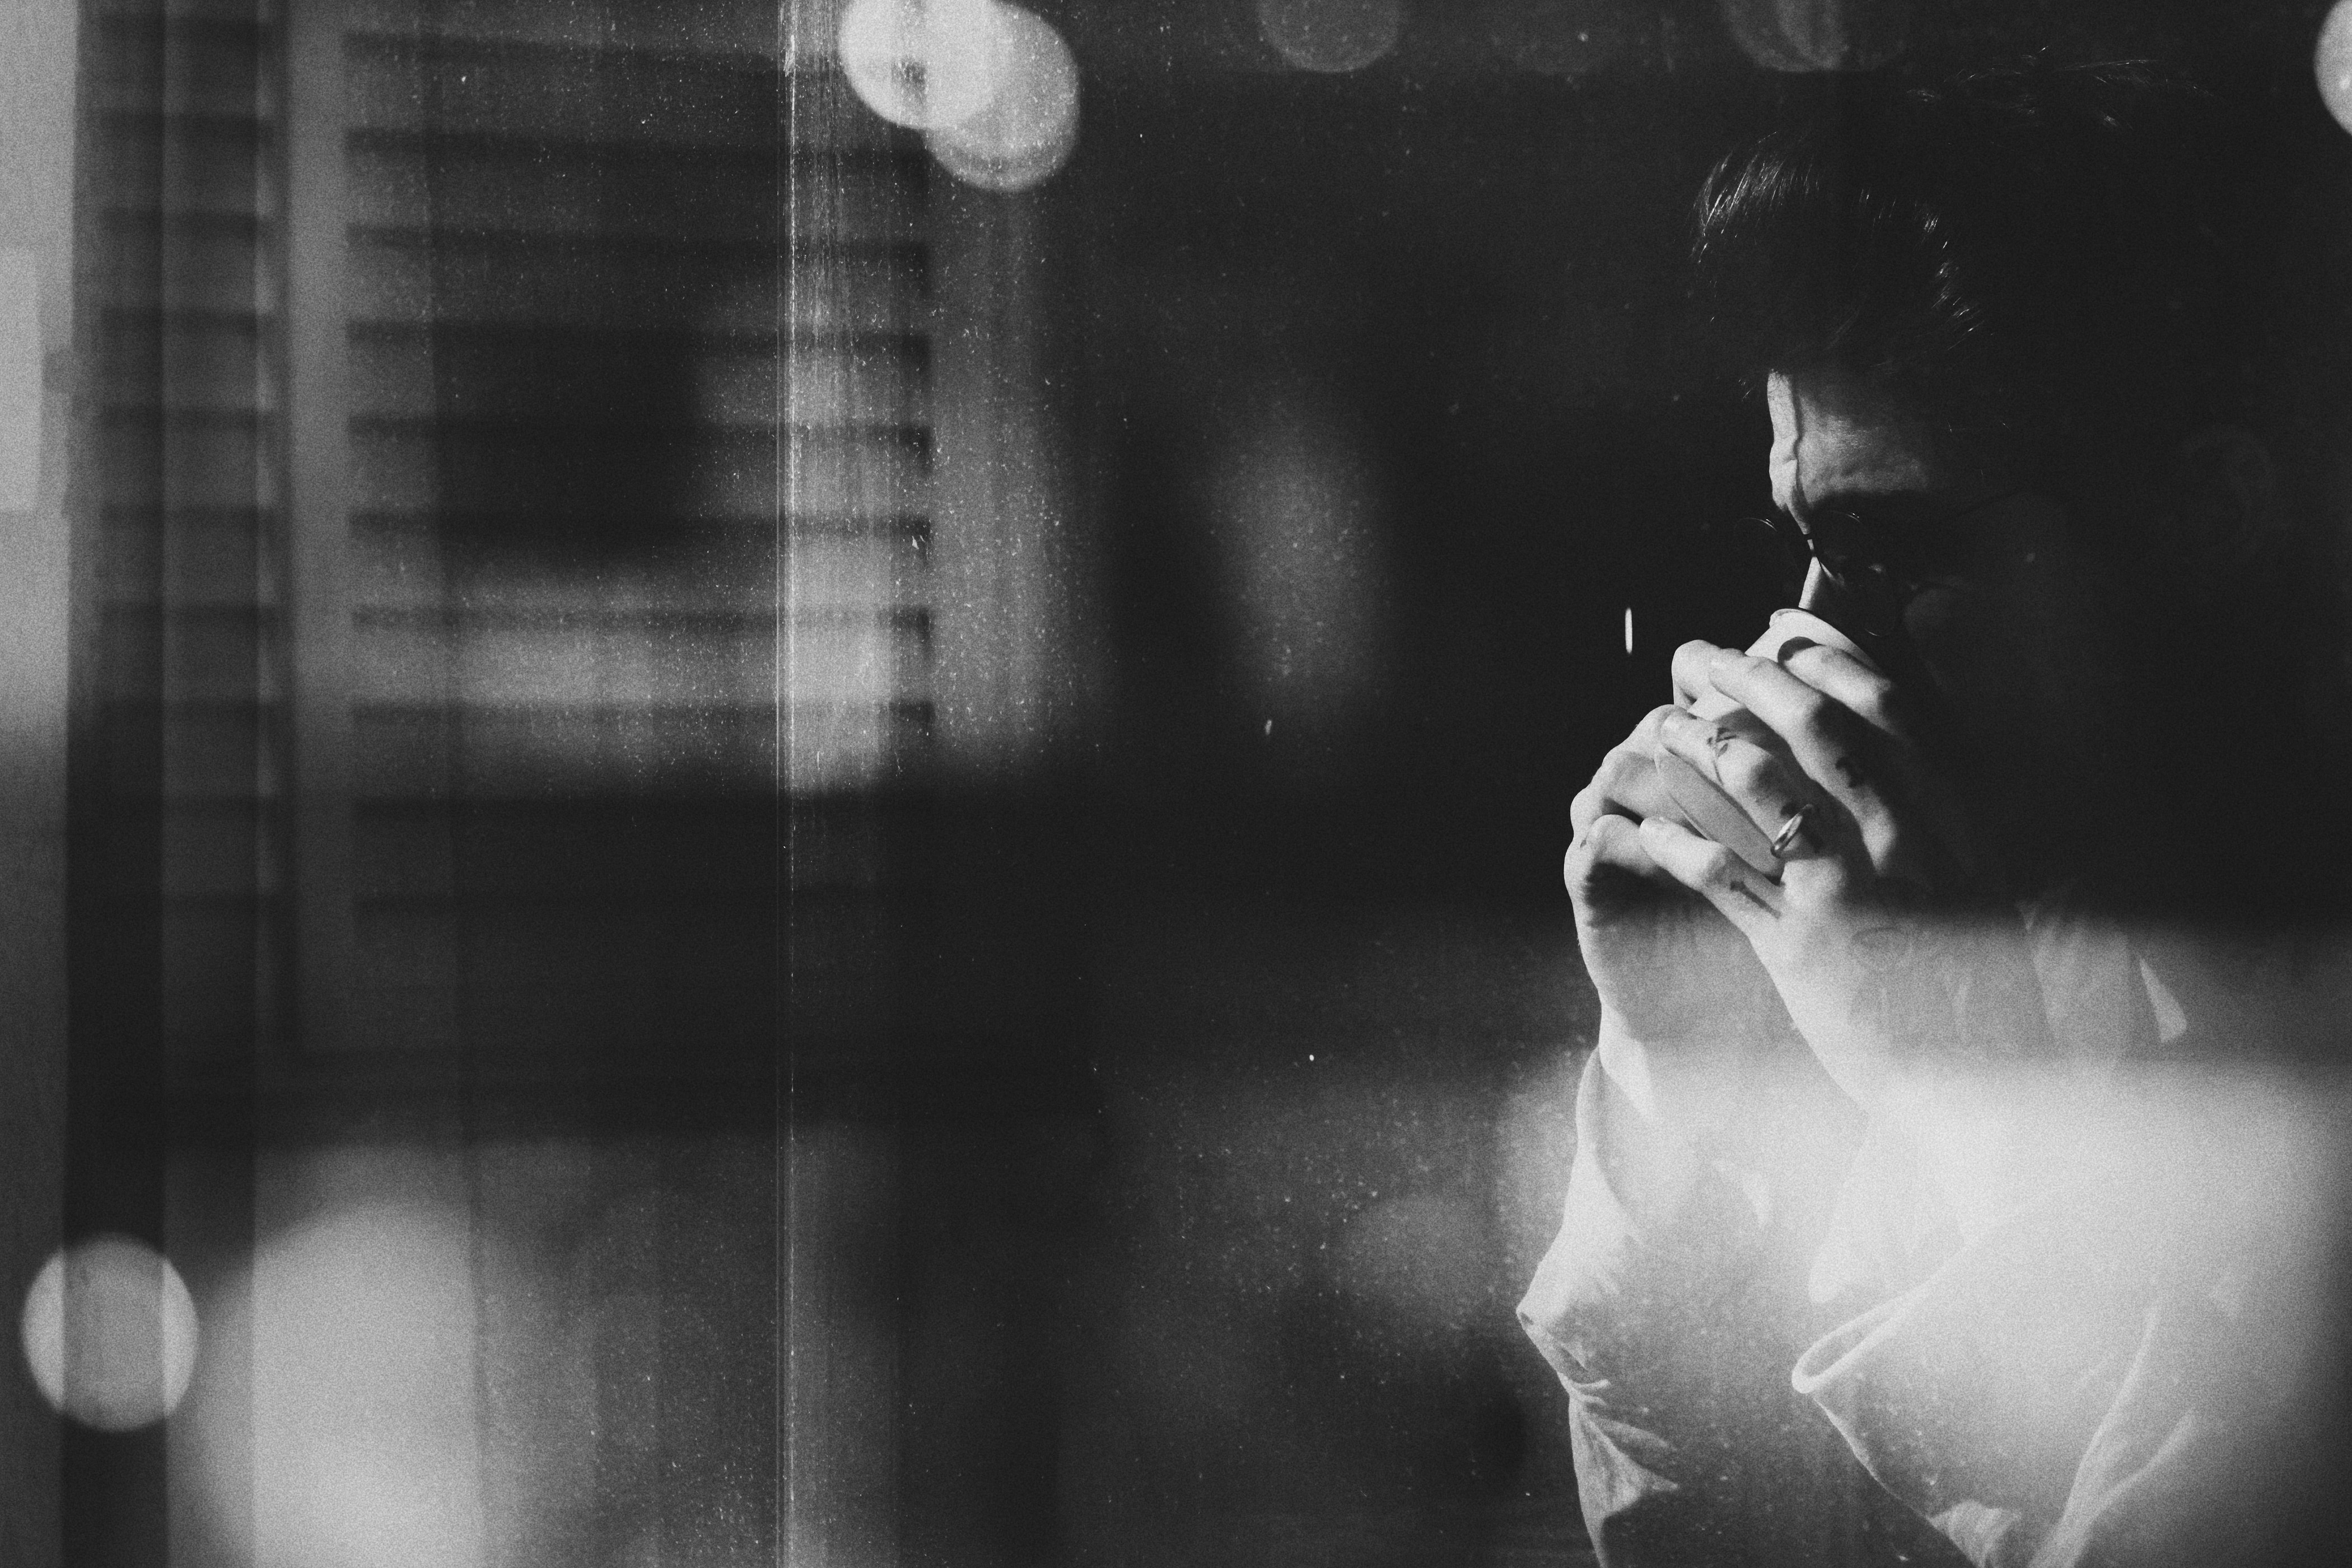 A man, in a black and white shot, sites beside a window with a bind over it, with his hands held together in front of his face, as if he is praying for a non-believer friend.